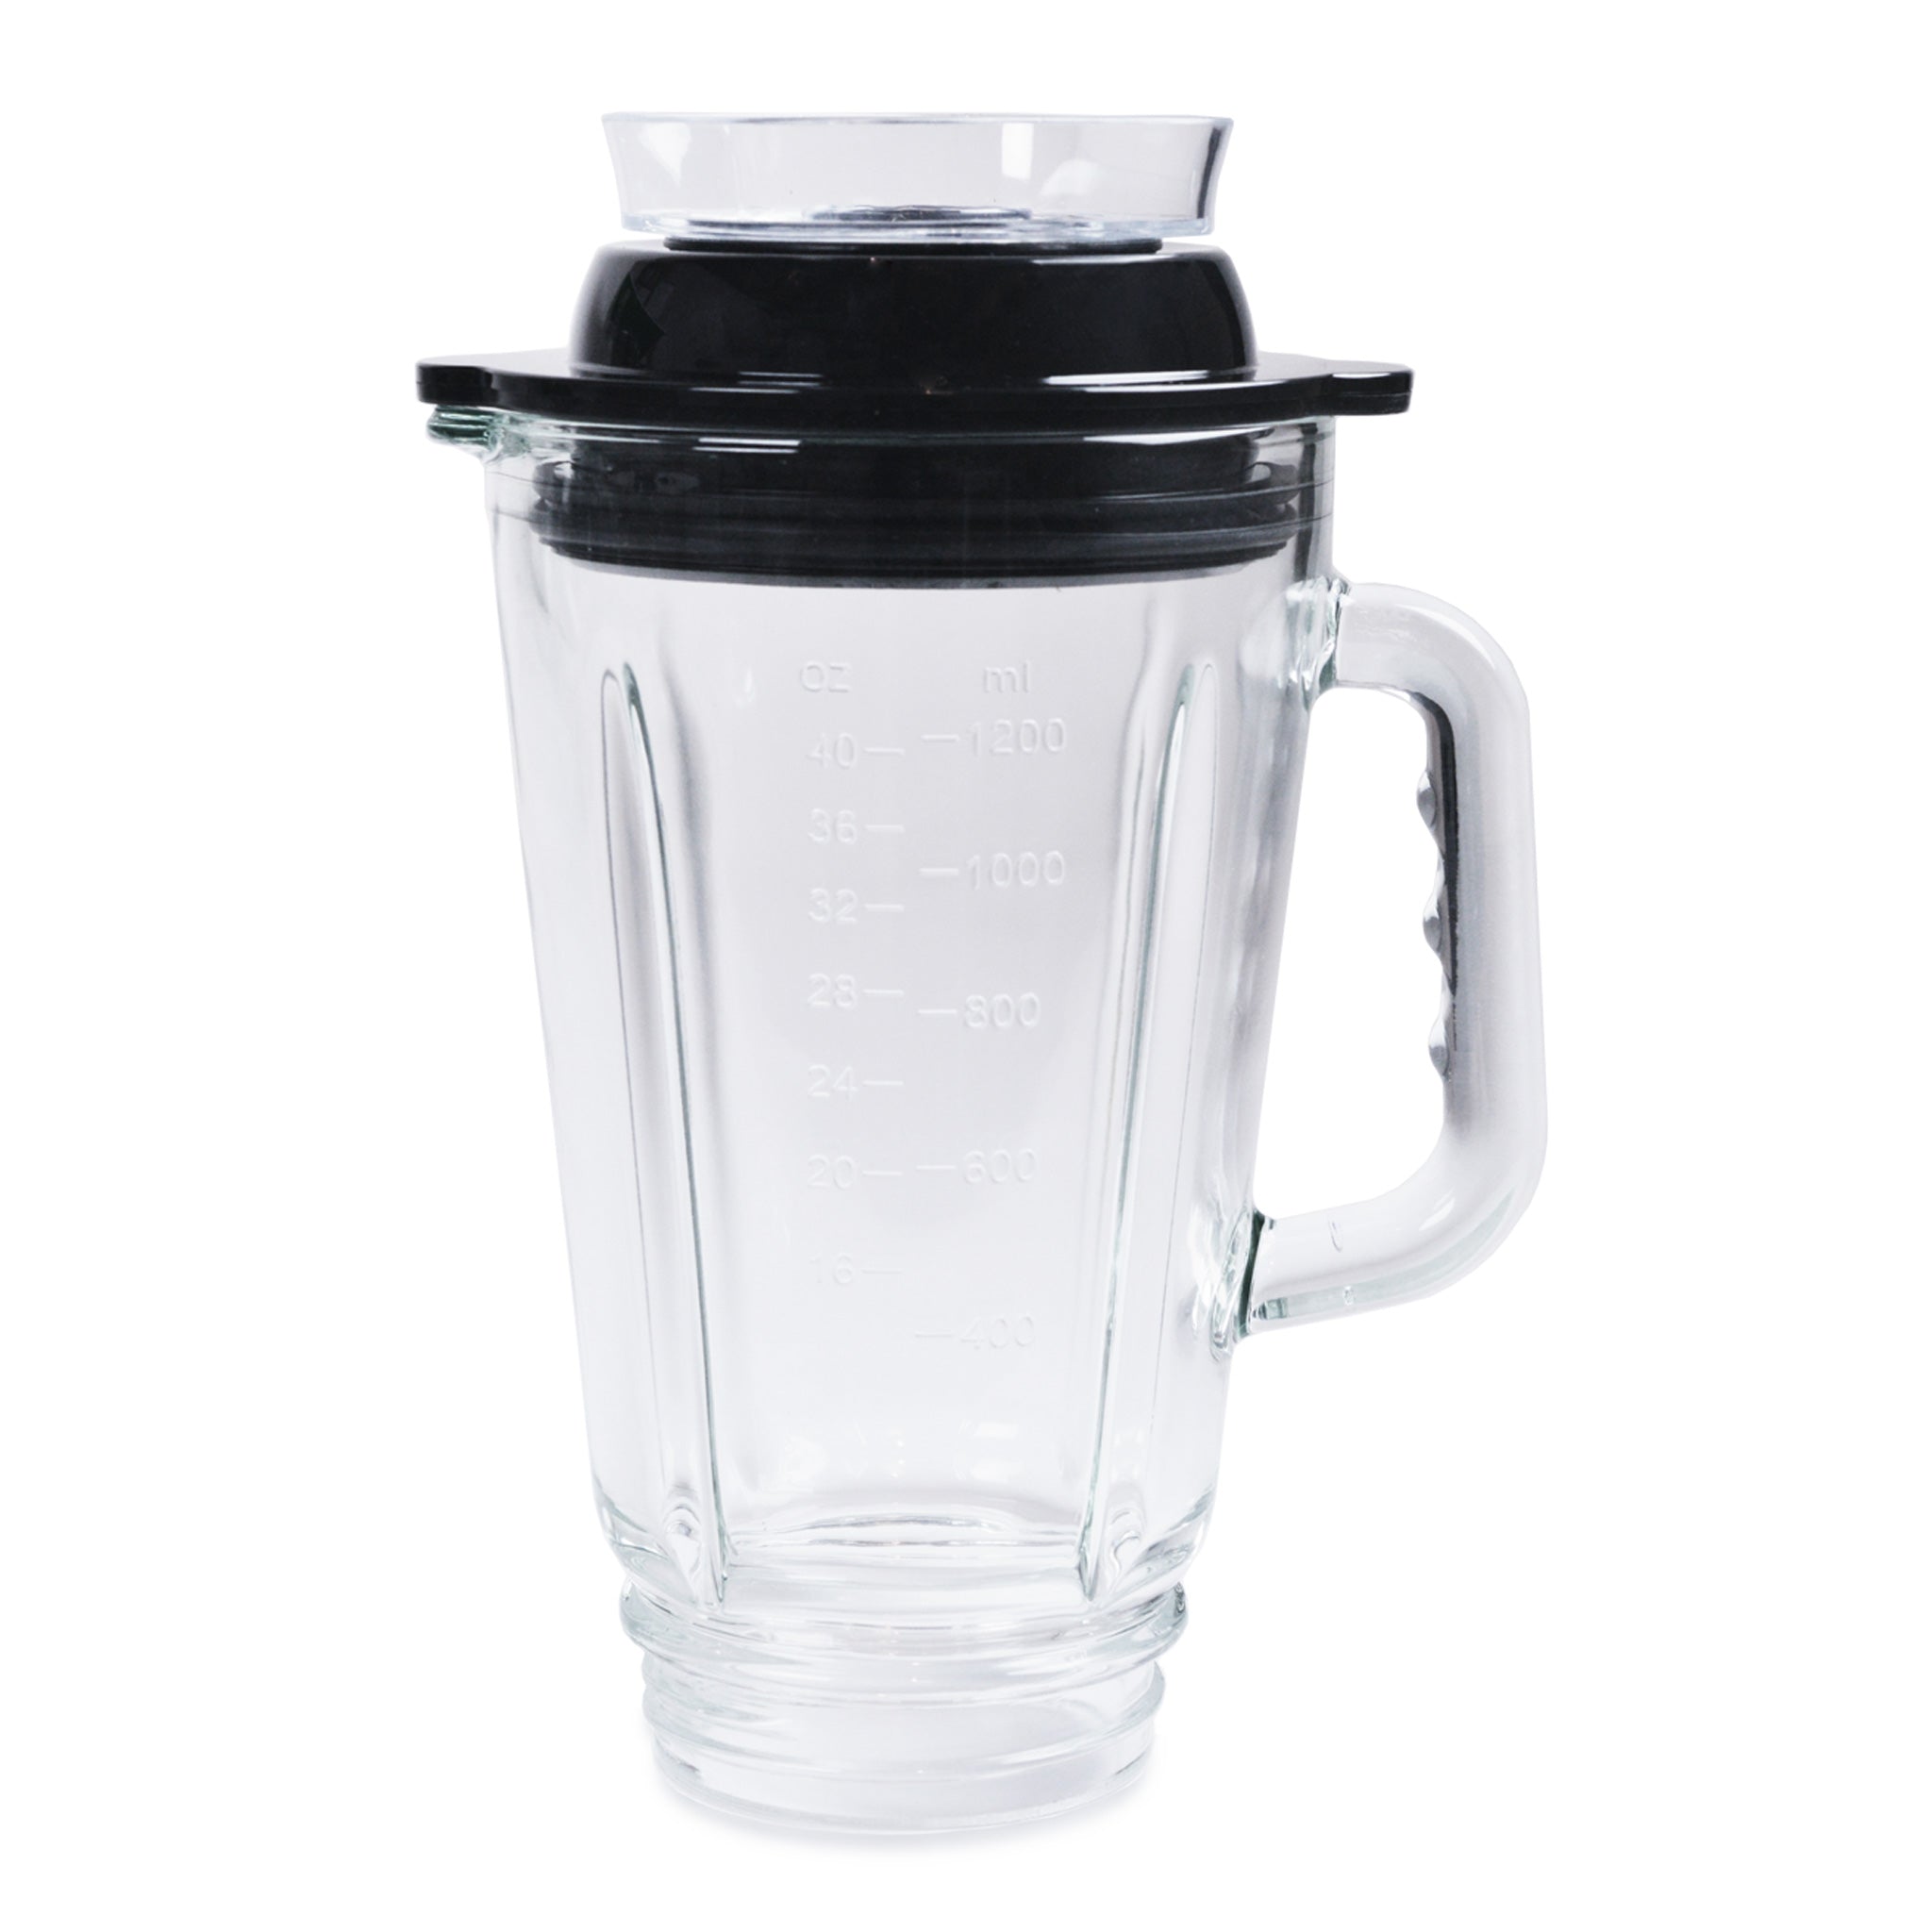 Tribest Glass 42 oz. 4-Speed Chrome Personal Blender with Vacuum PBG-5001-A  - The Home Depot